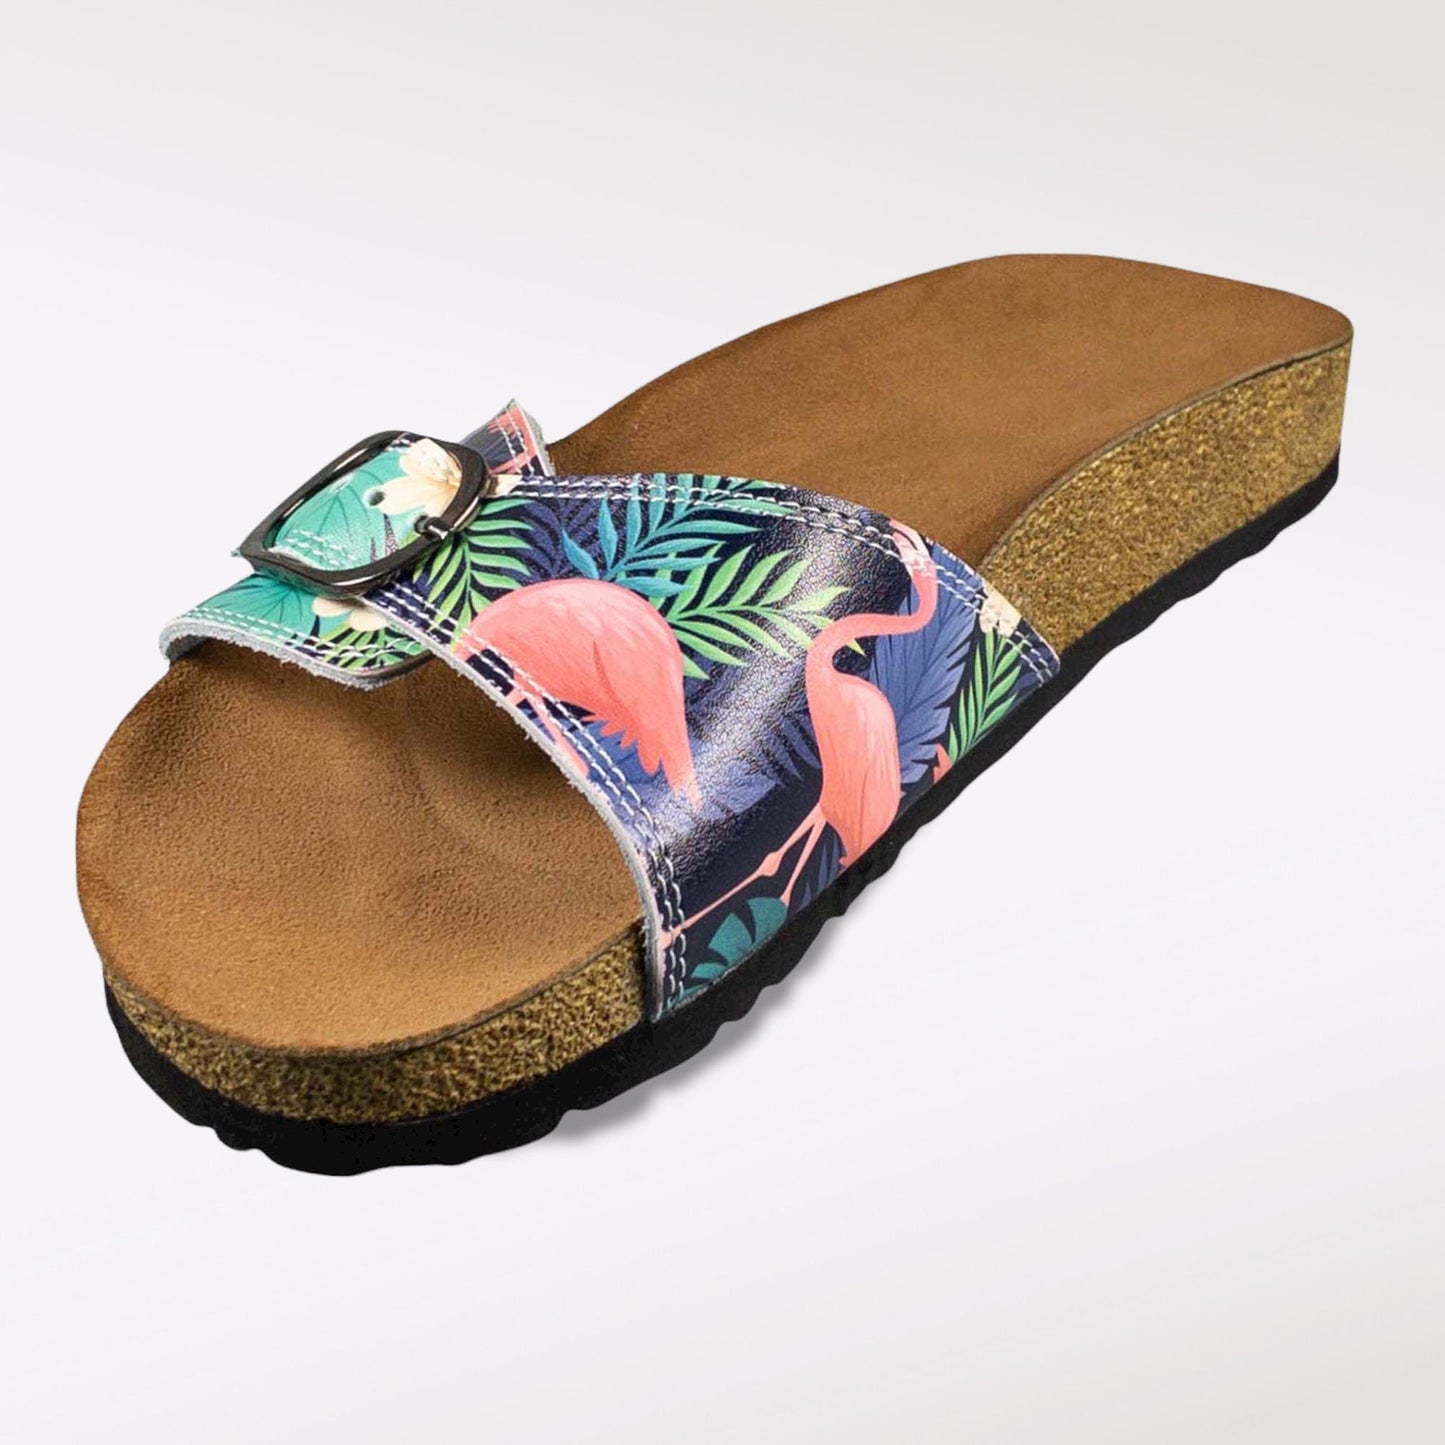 Flamingo Open Toe Leather Sandals Clogs Slippers